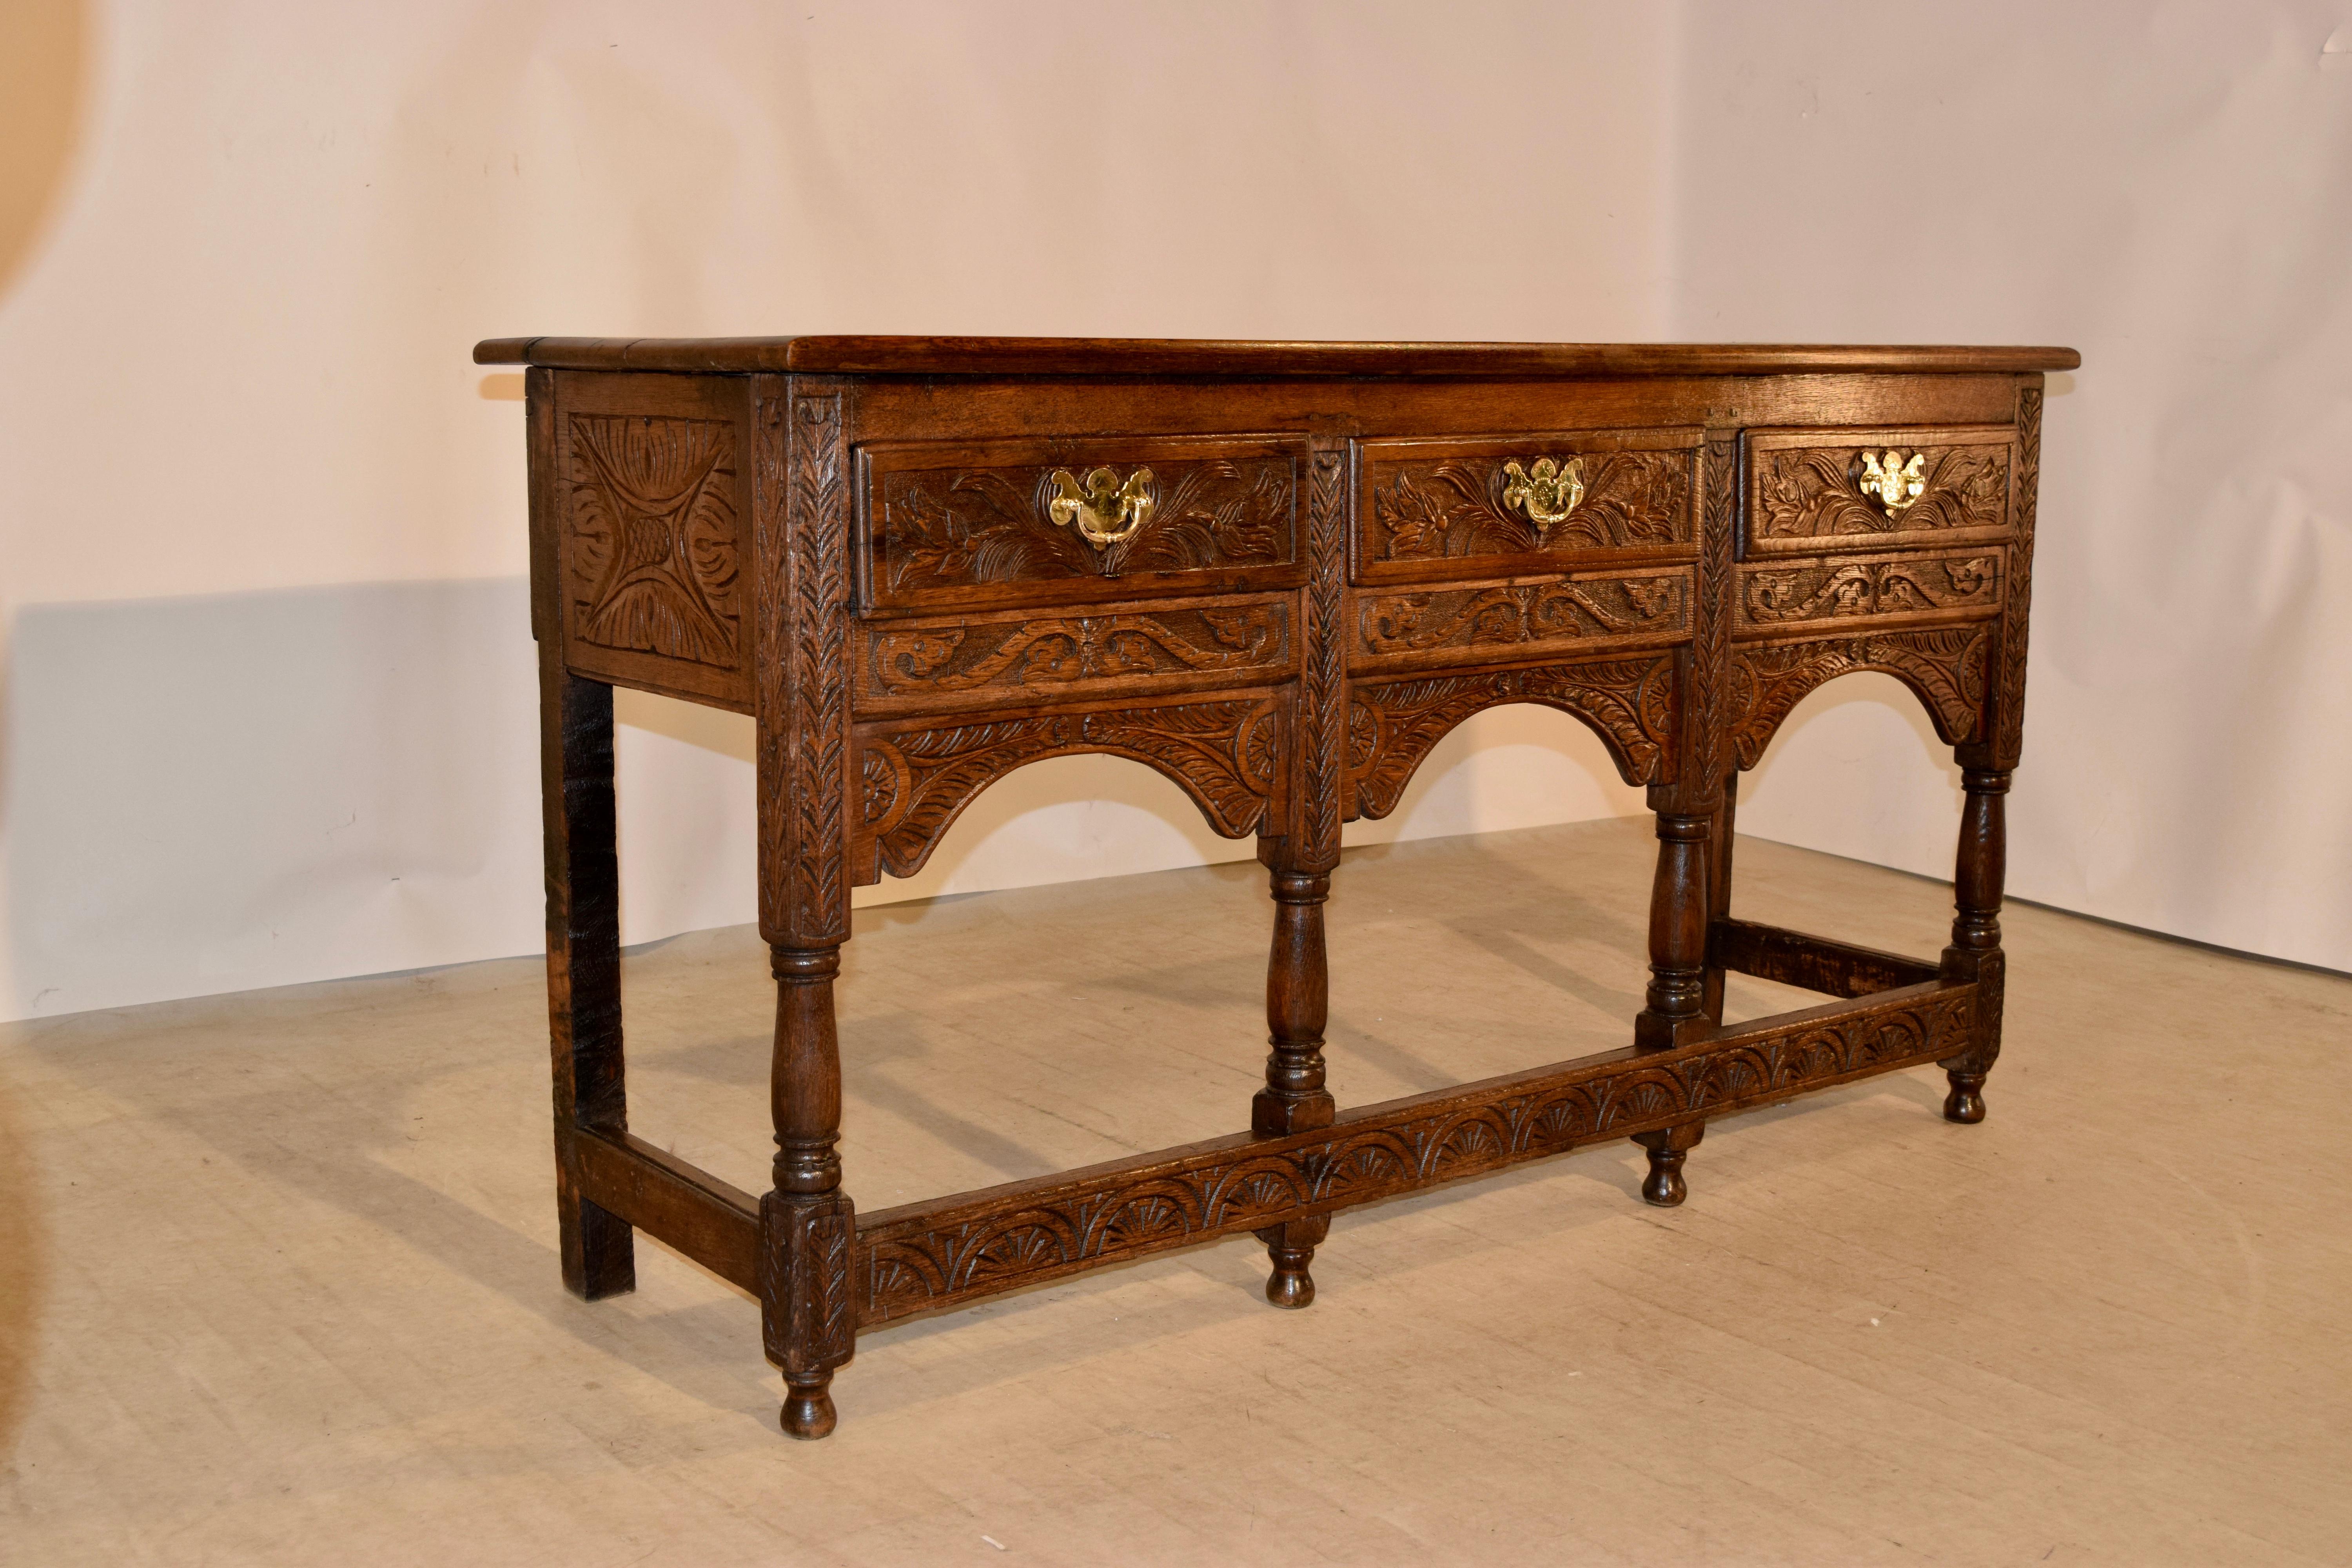 18th century English sideboard made from oak with three drawers, all with intricate hand-carved decoration and hand cast brass pulls with engraving over carved and scalloped aprons and carved panelled sides as well. The legs are hand turned and are